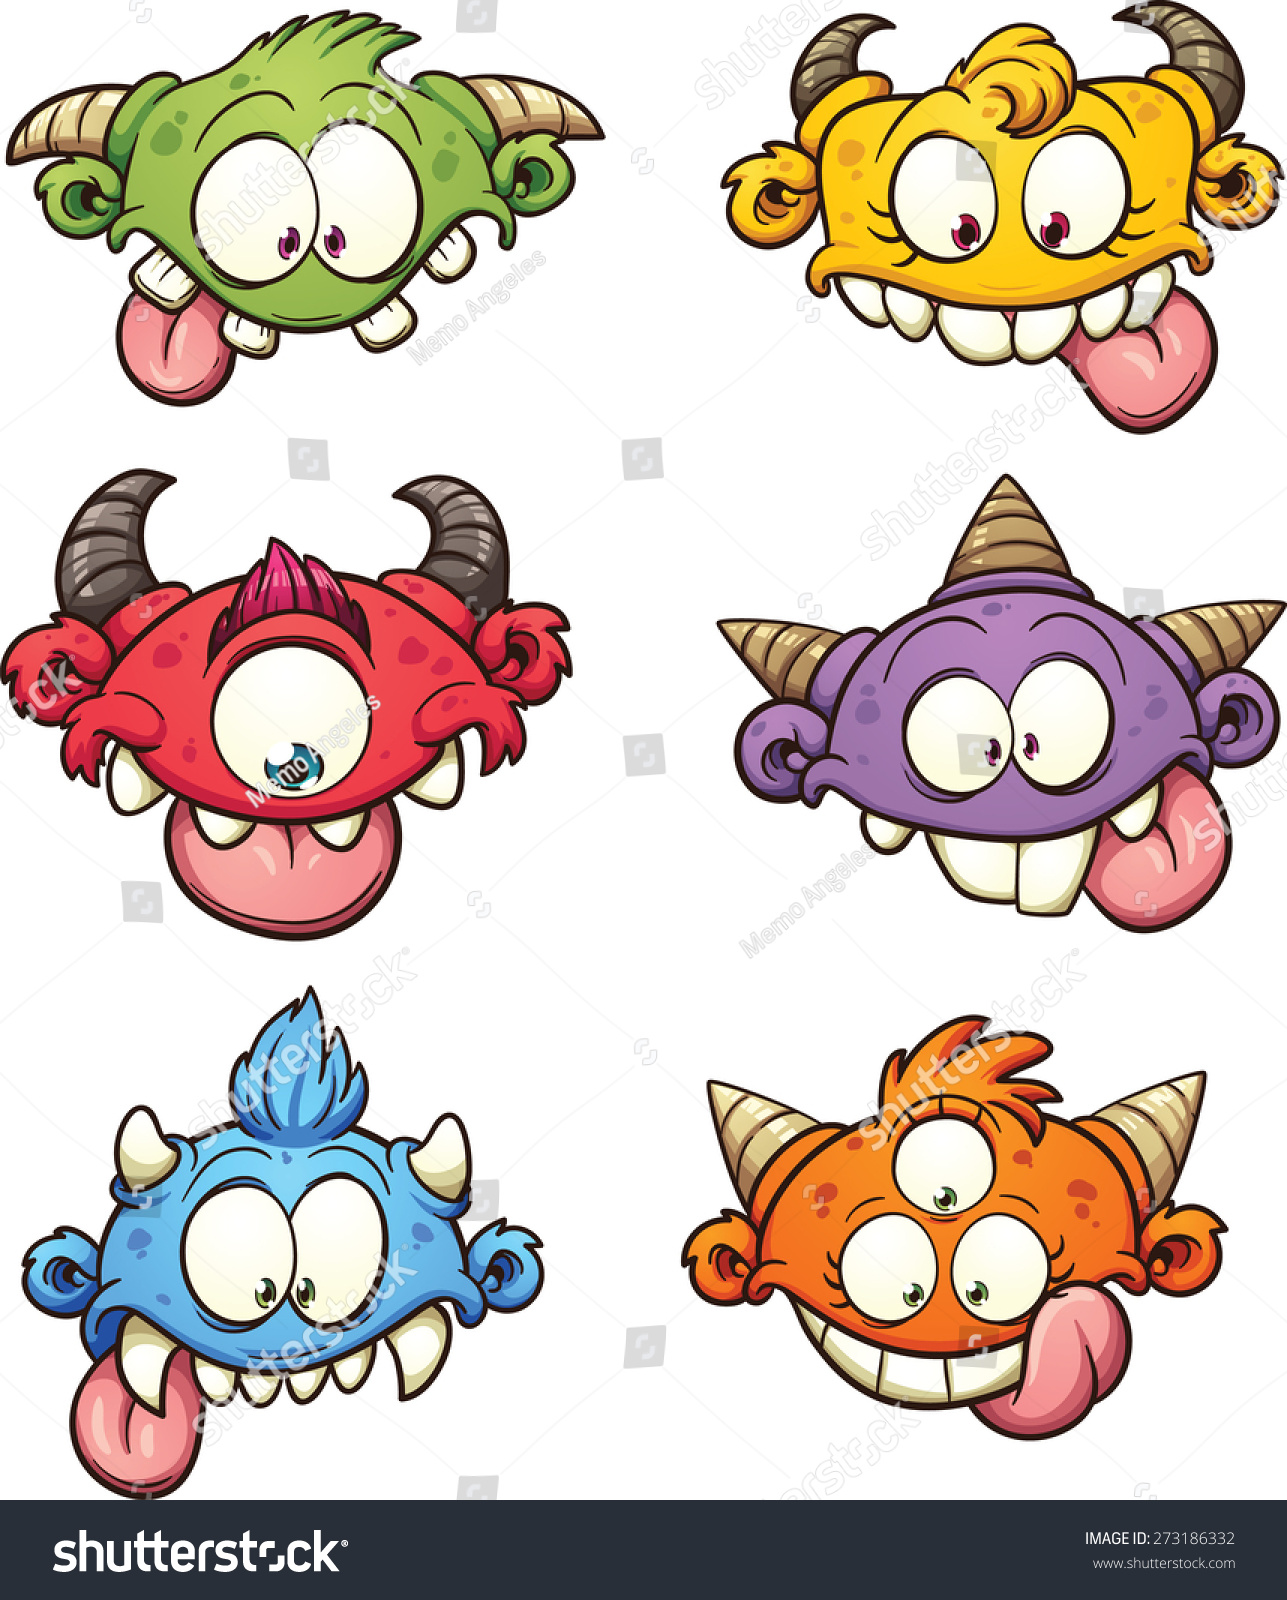 Colorful Cartoon Monster Heads. Vector Clip Art Illustration With ...